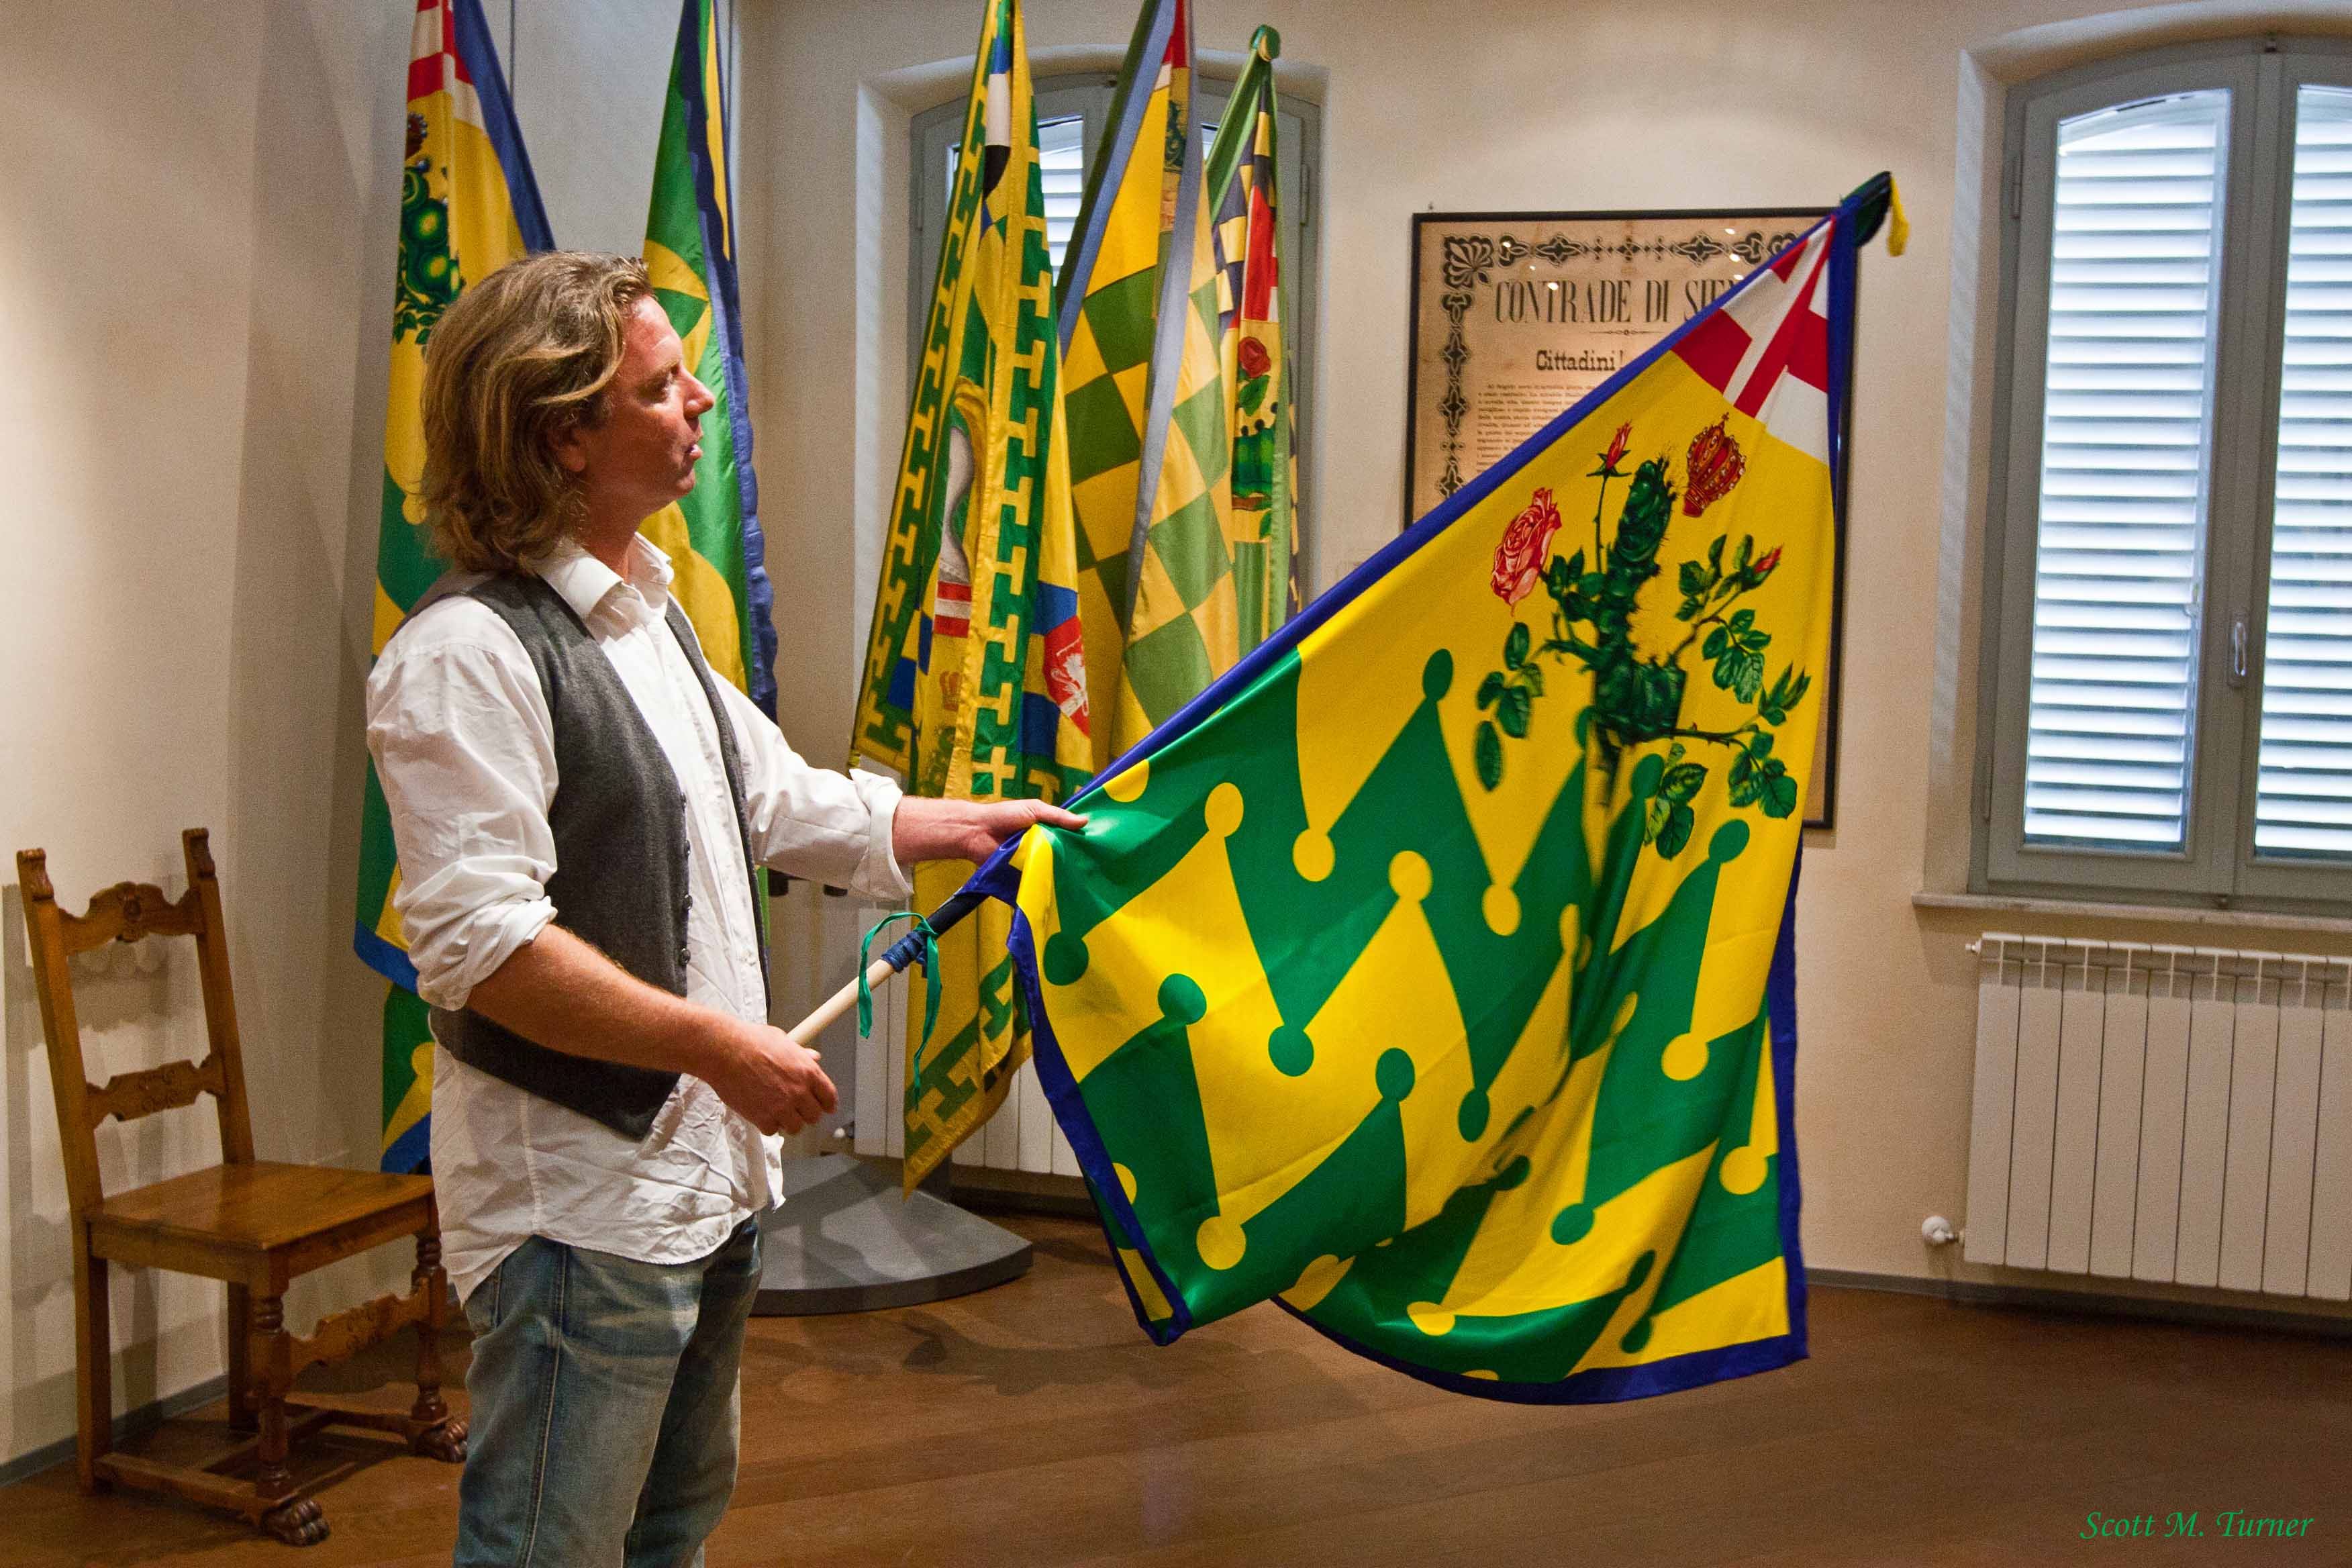 One of the flags of the Contrada Bruco